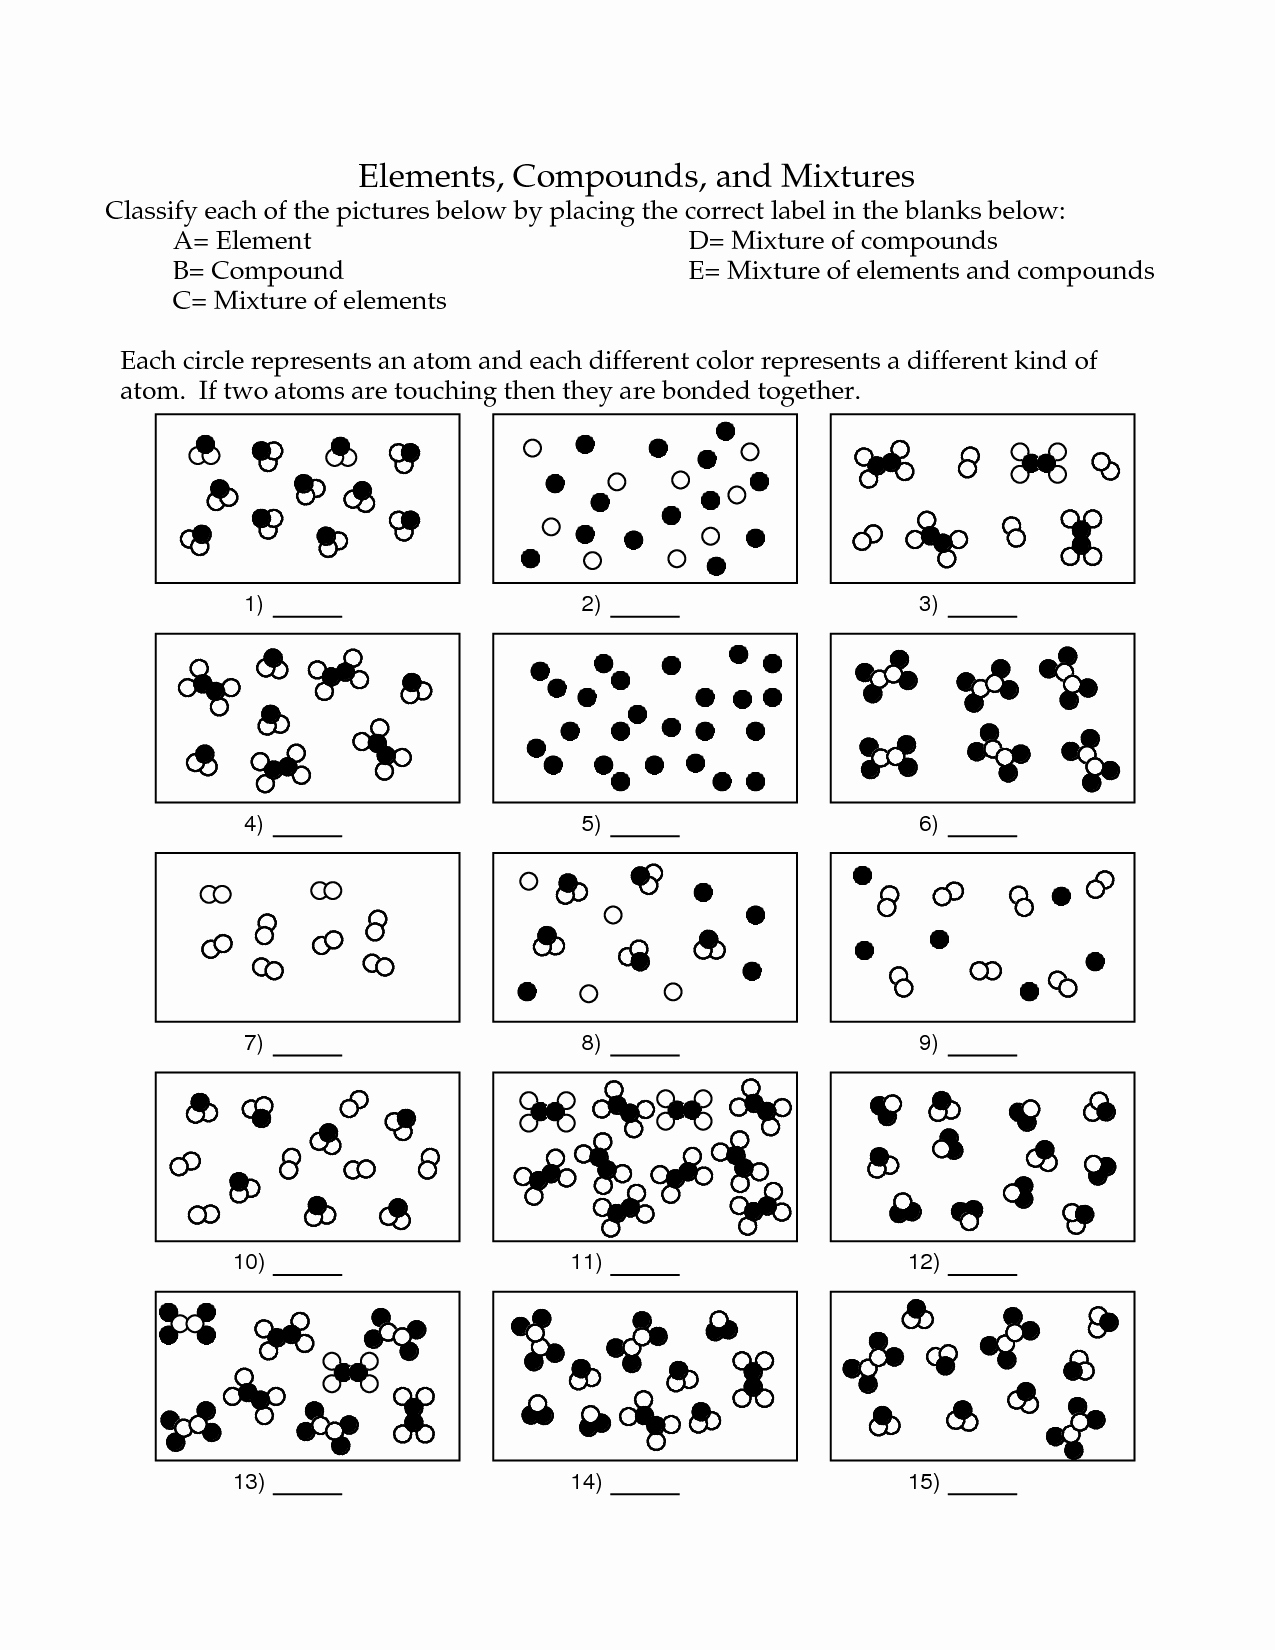 Elements Compounds And Mixtures Poem Worksheet Answers